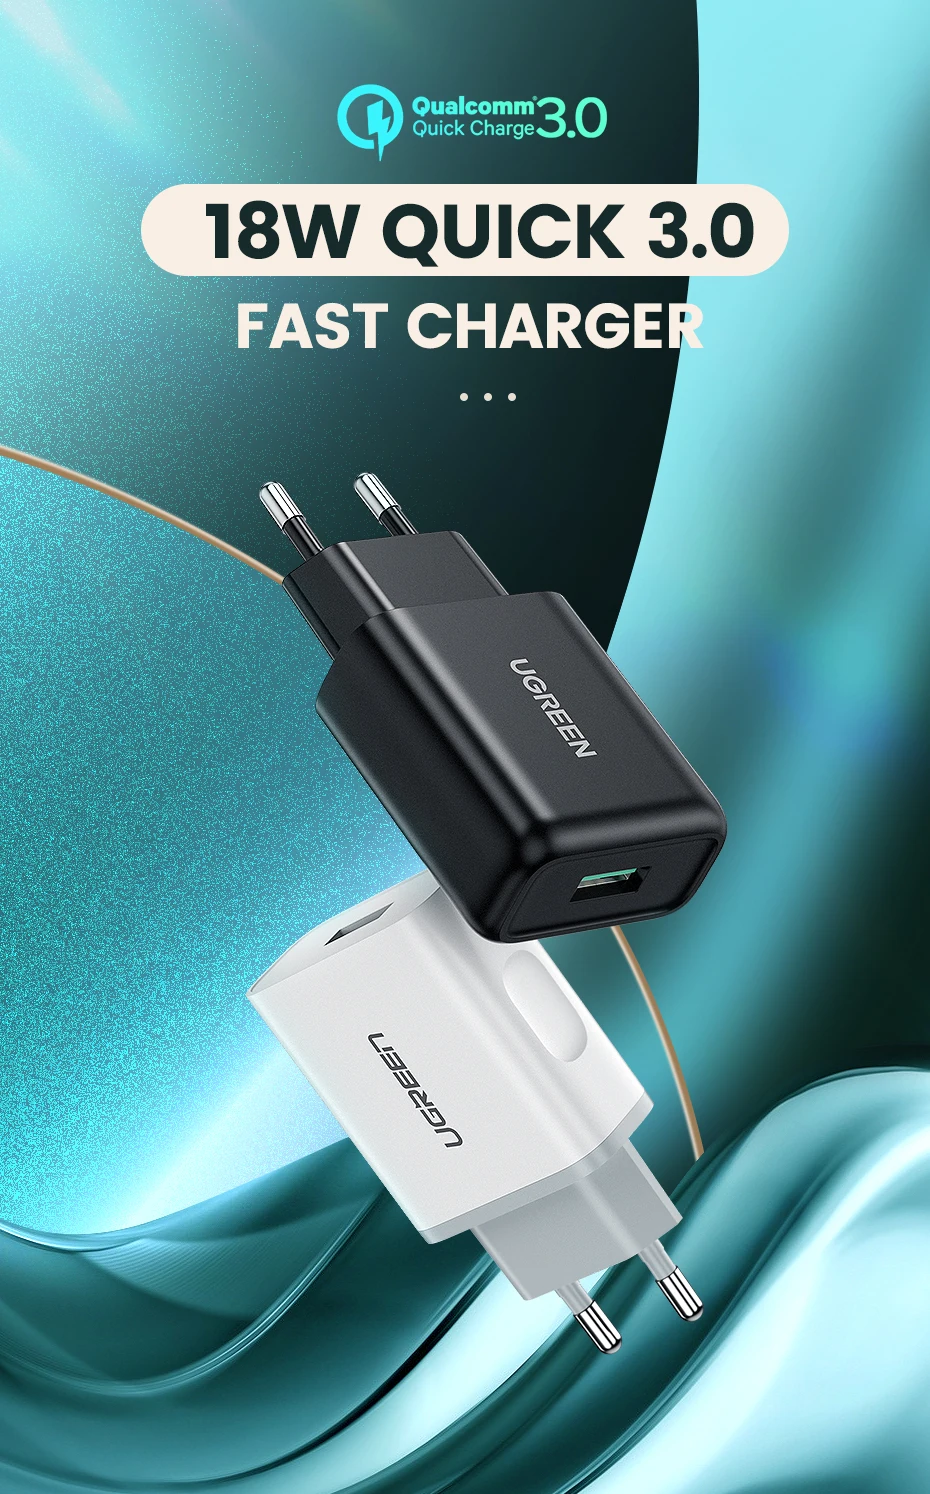 usb fast charge Ugreen USB Quick Charge 3.0 QC 18W USB Charger QC3.0 Fast Wall Charger Mobile Phone Charger for Samsung s10 Huawei Xiaomi iPhone powerbank quick charge 3.0